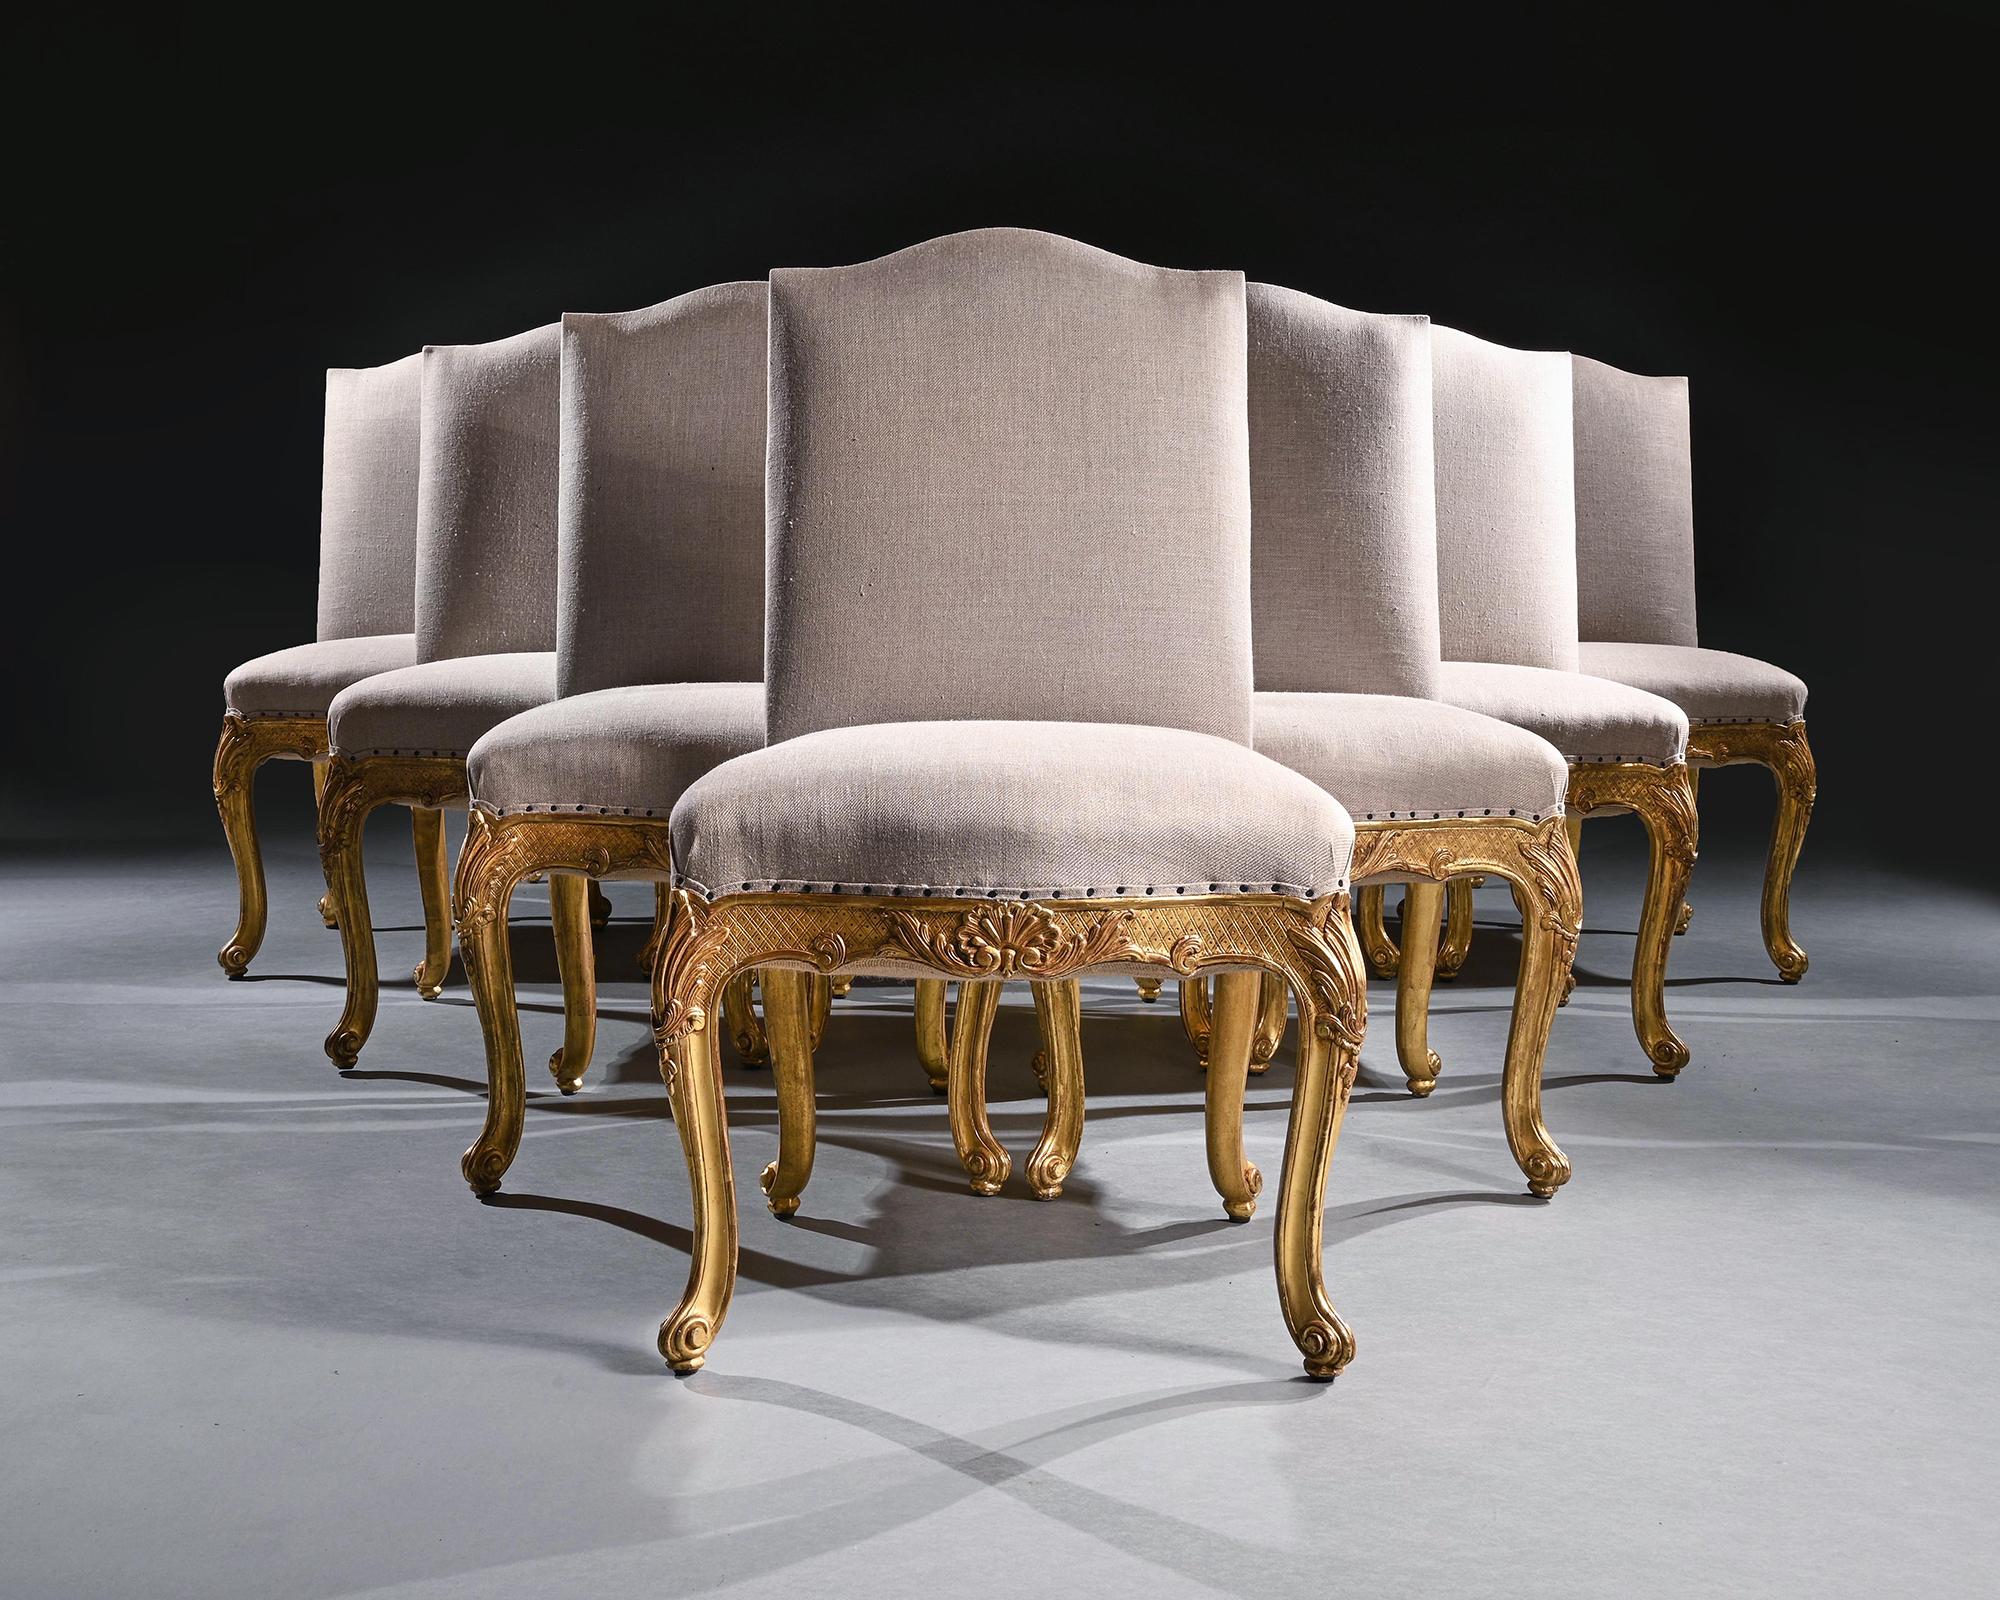 An attractive fine quality set of a twelve French giltwood dining / salon chairs in the Louis XV style upholstered in an Irish linen.

French circa 1940.

This elegant set of 12 dining chairs have been executed in the finest manner with superior